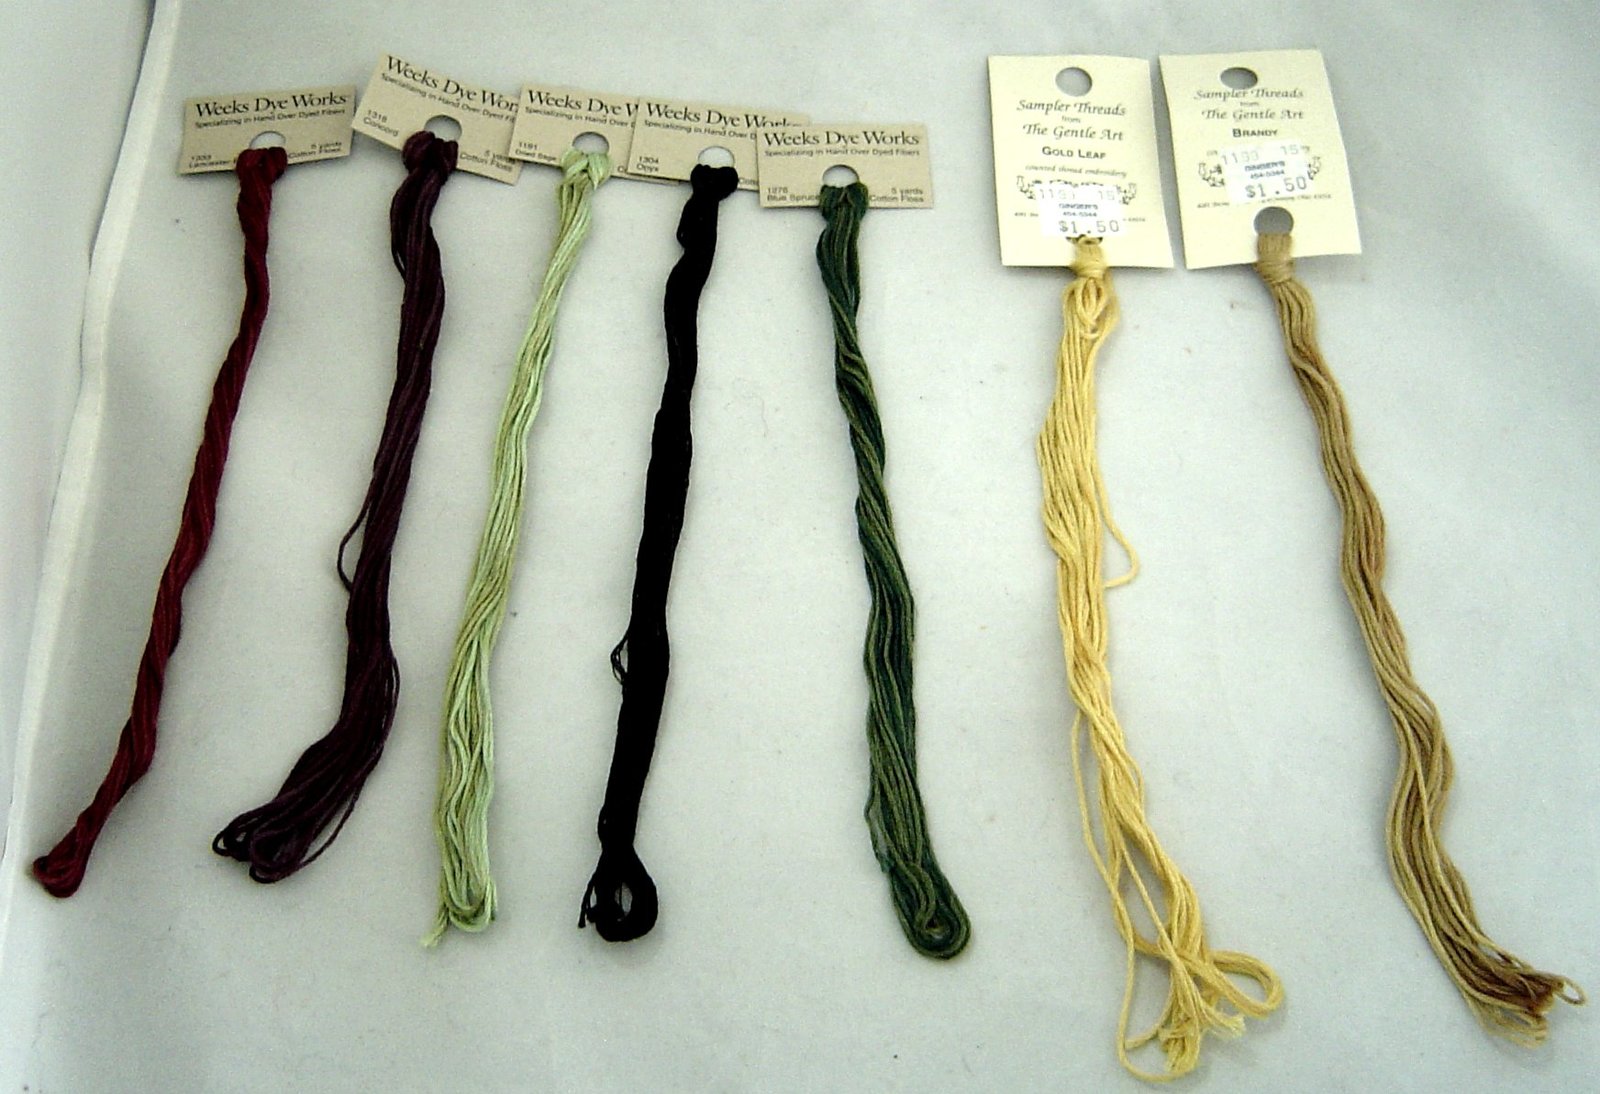  Weeks Dye Works Lot of 7 Hand dyed Cotton Floss 6 Strand 5 yds - $19.99